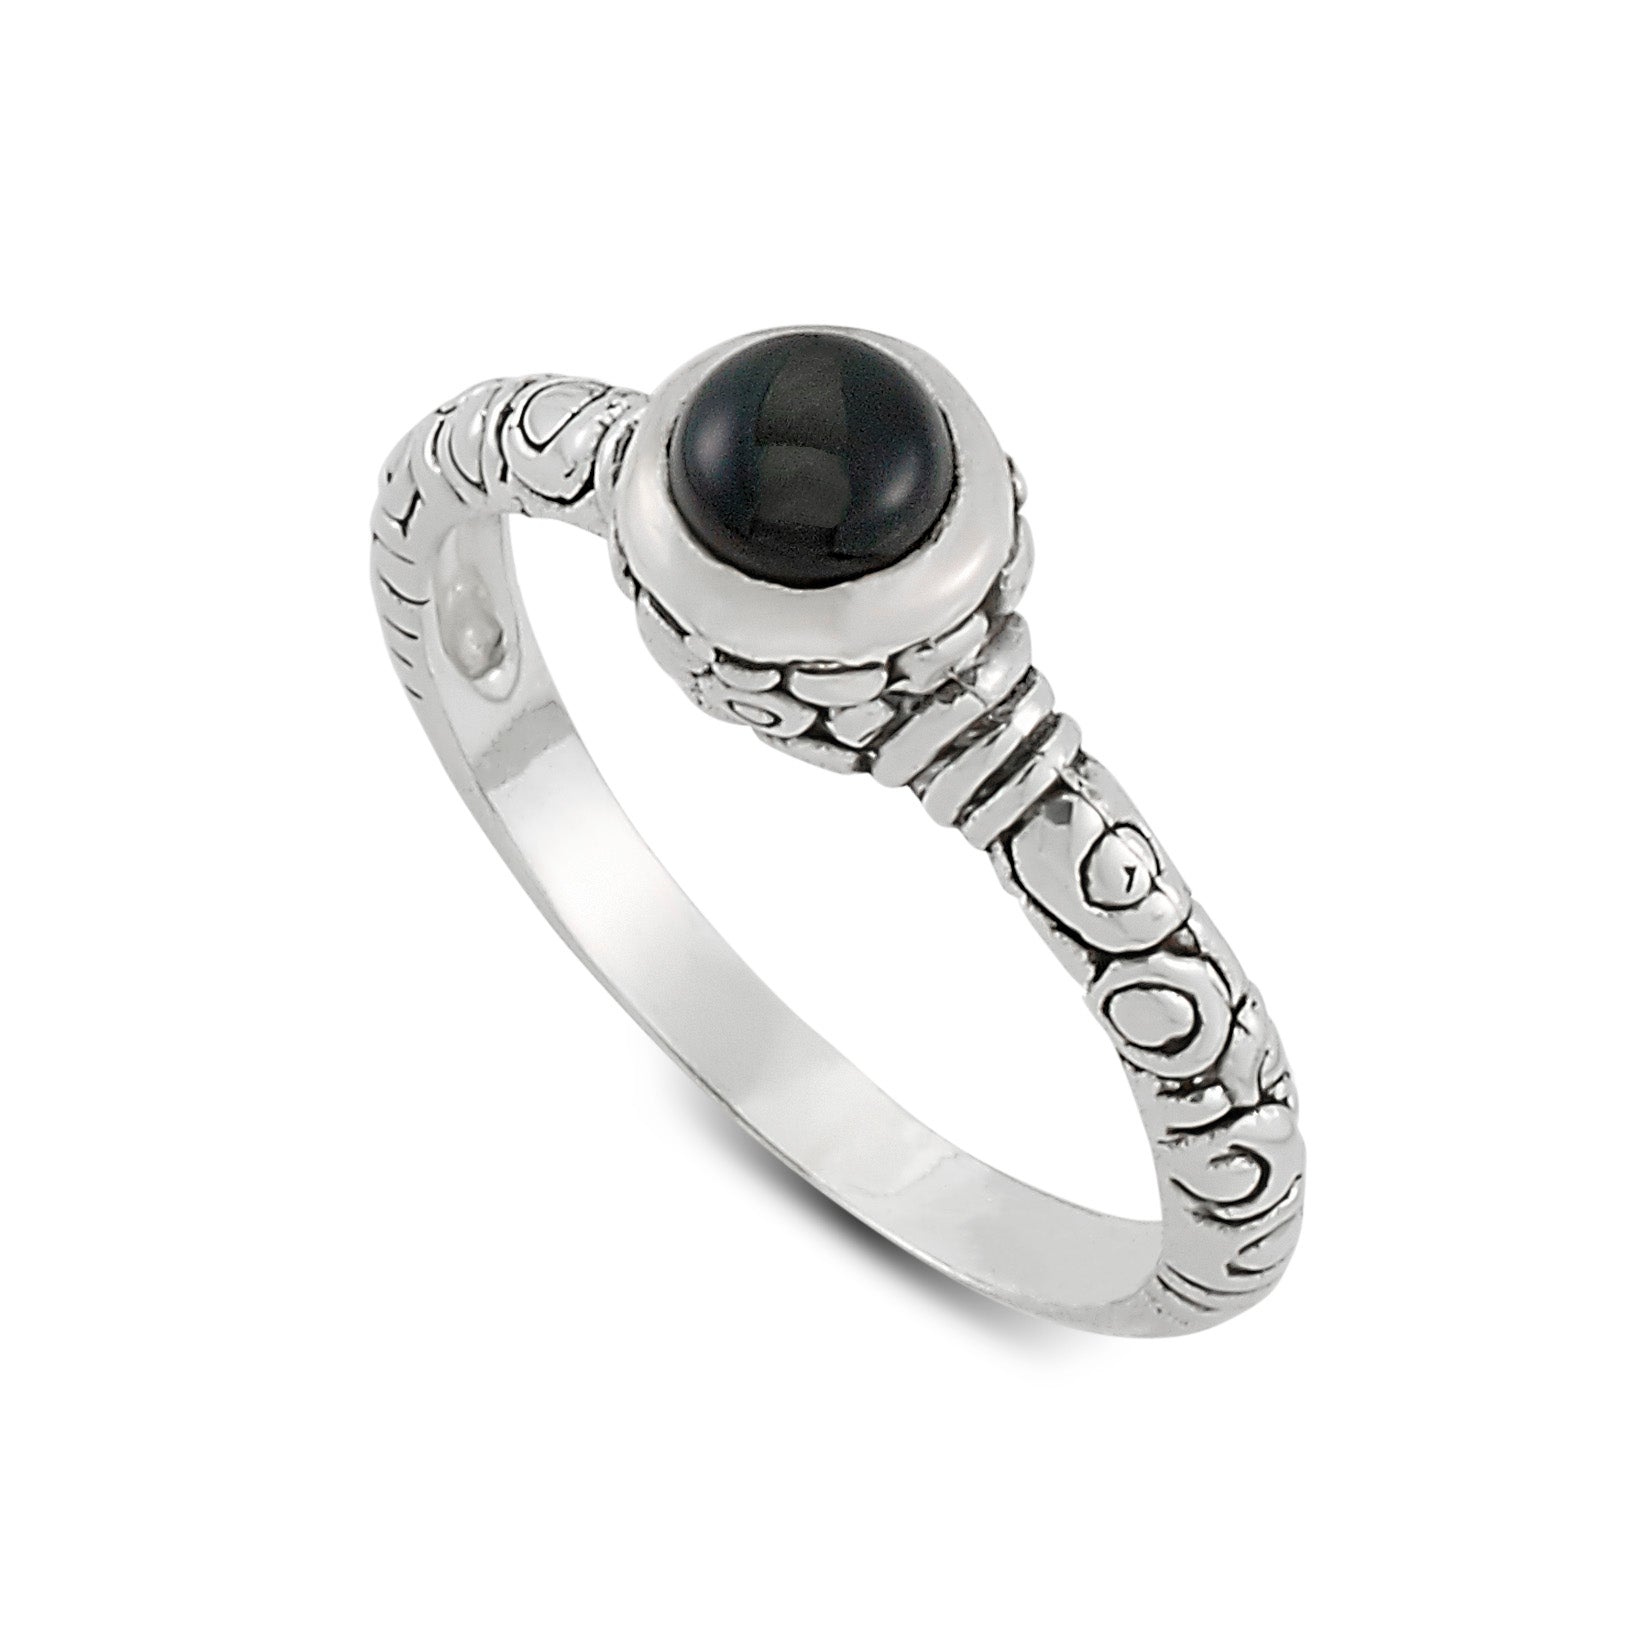 Samuel B. Sterling Silver Round Cabachon Onyx Iyang Ring with Bali Design Band, Size 6. Our Sterling Silver round onyx stack ring, handcrafted in Bali by our skilled artisans. From our signature collection, Royal Bali™ featuring designs handcrafted using sterling silver and genuine gemstones.